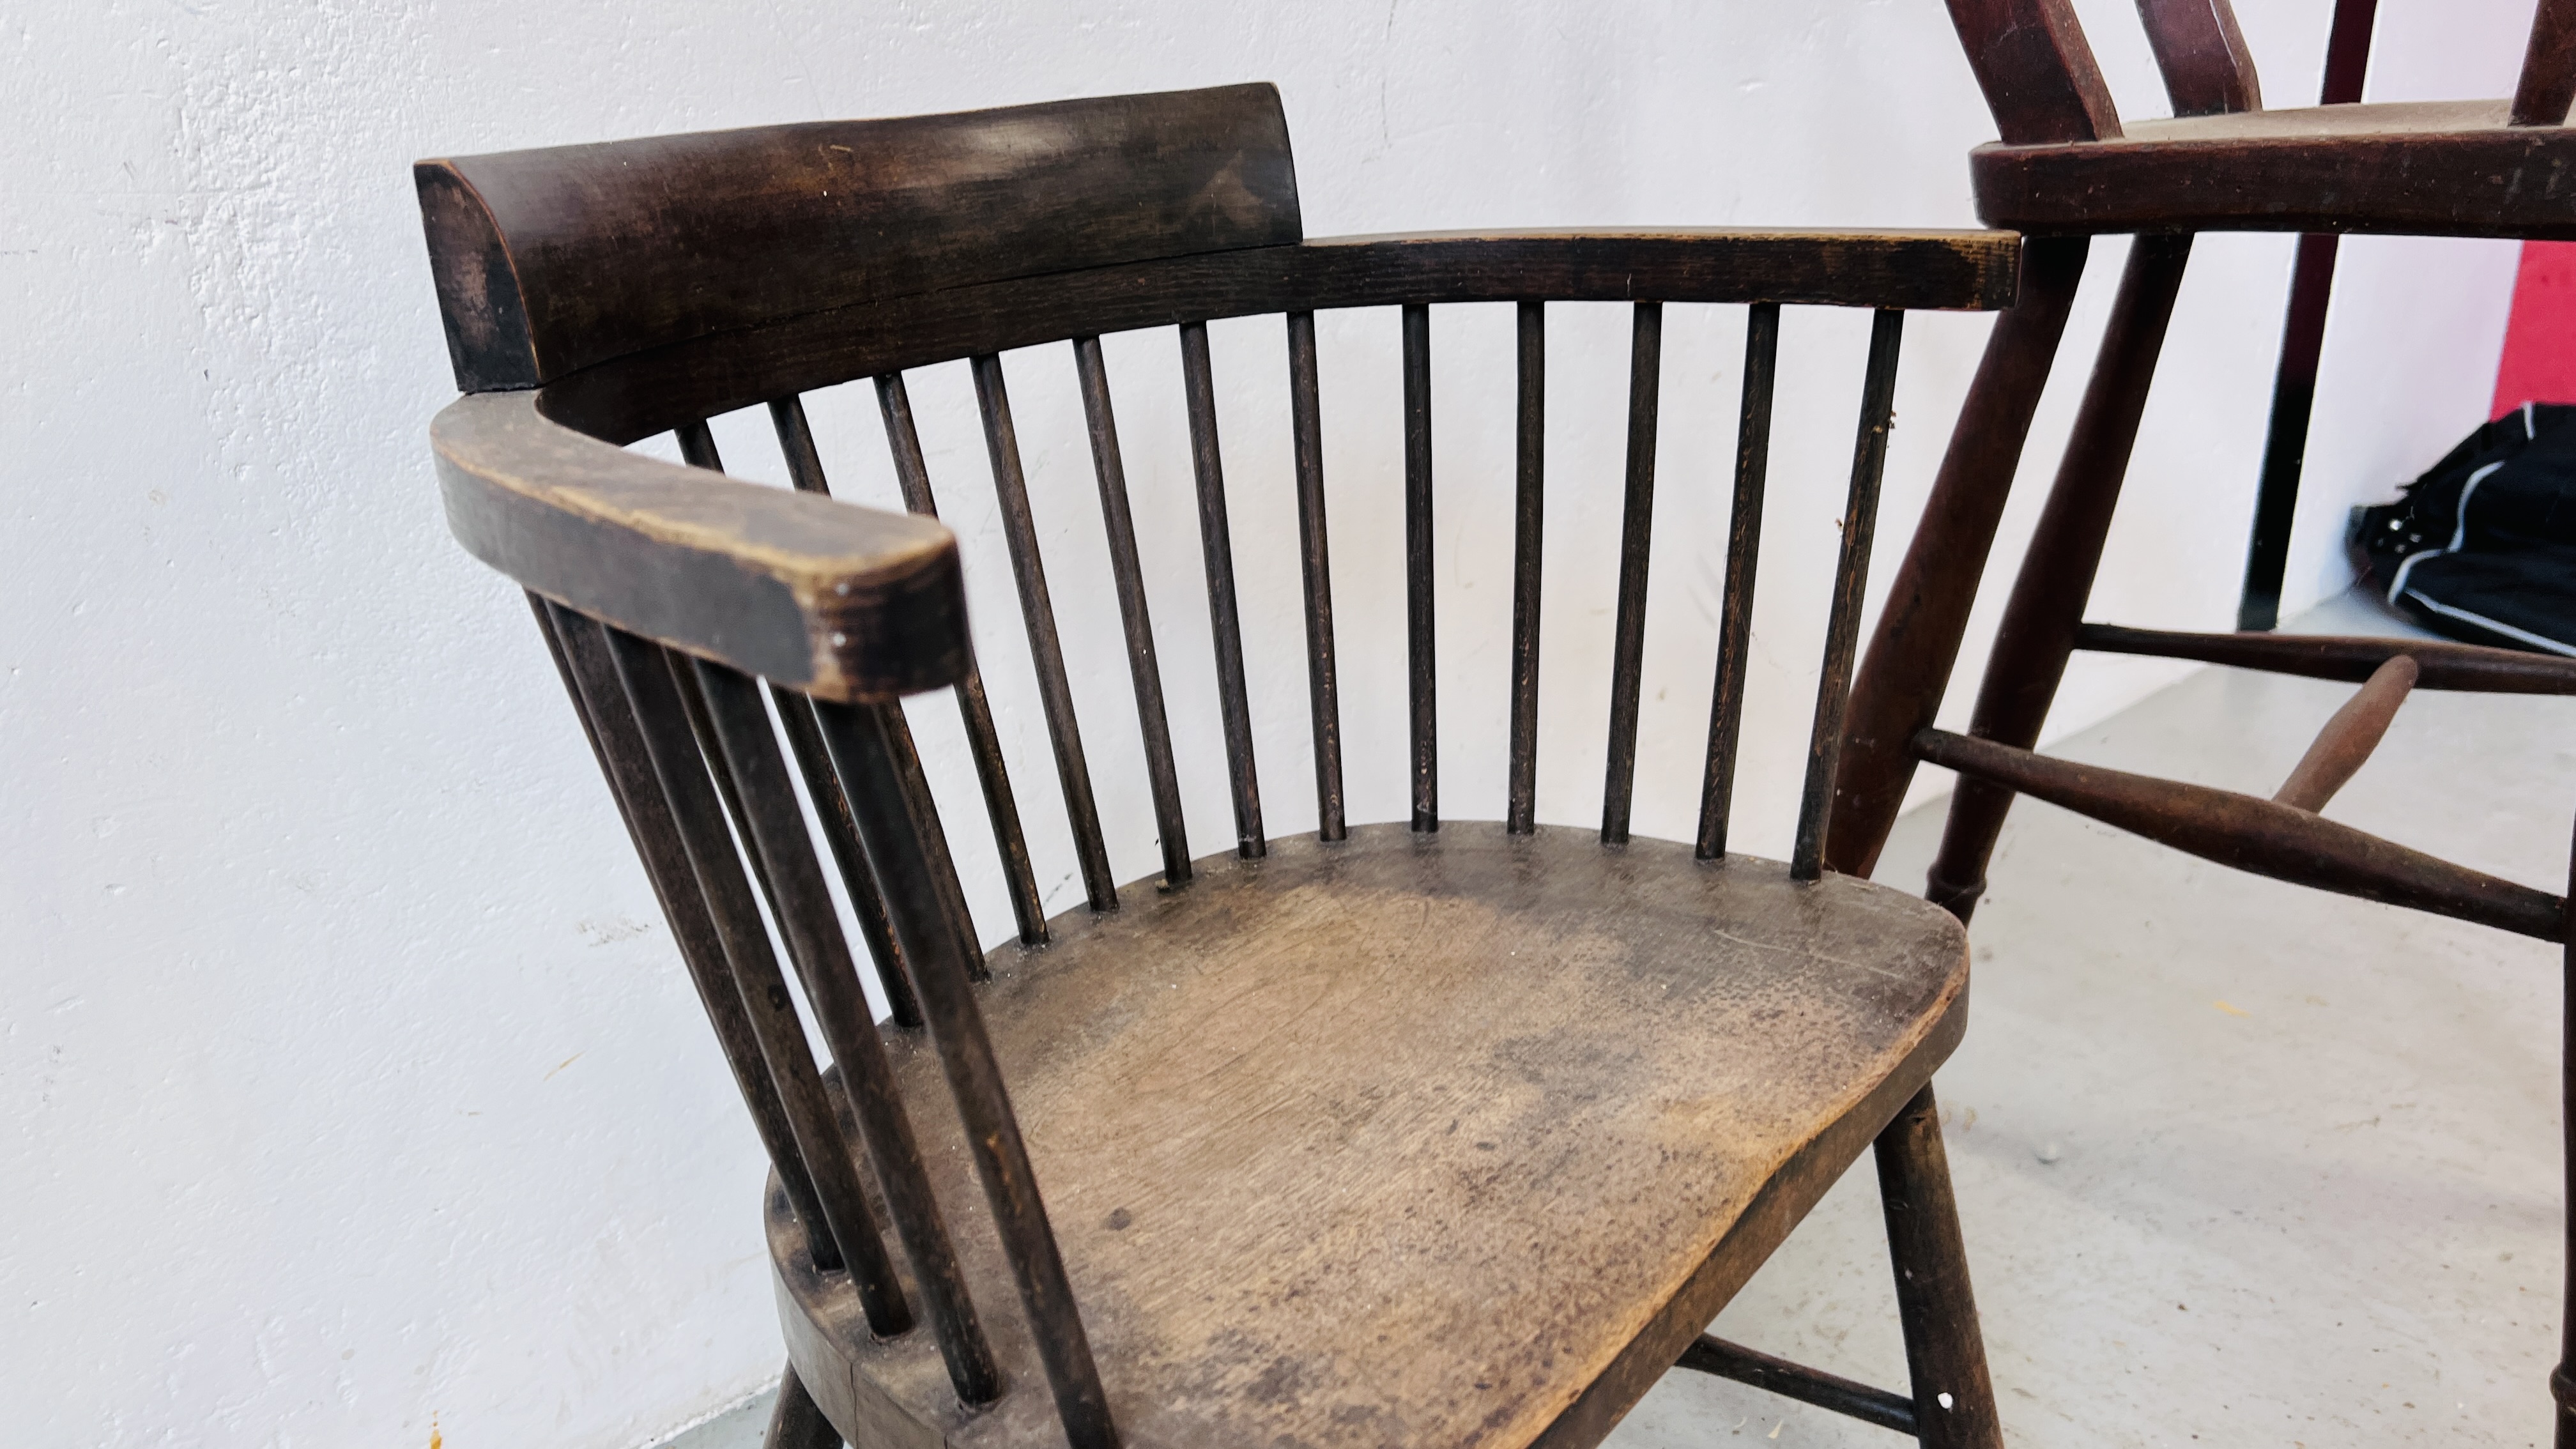 VINTAGE VICTORIAN HARDWOOD HIGHCHAIR ALONG WITH A LIBERTY STYLE CHILD'S CHAIR. - Image 7 of 8